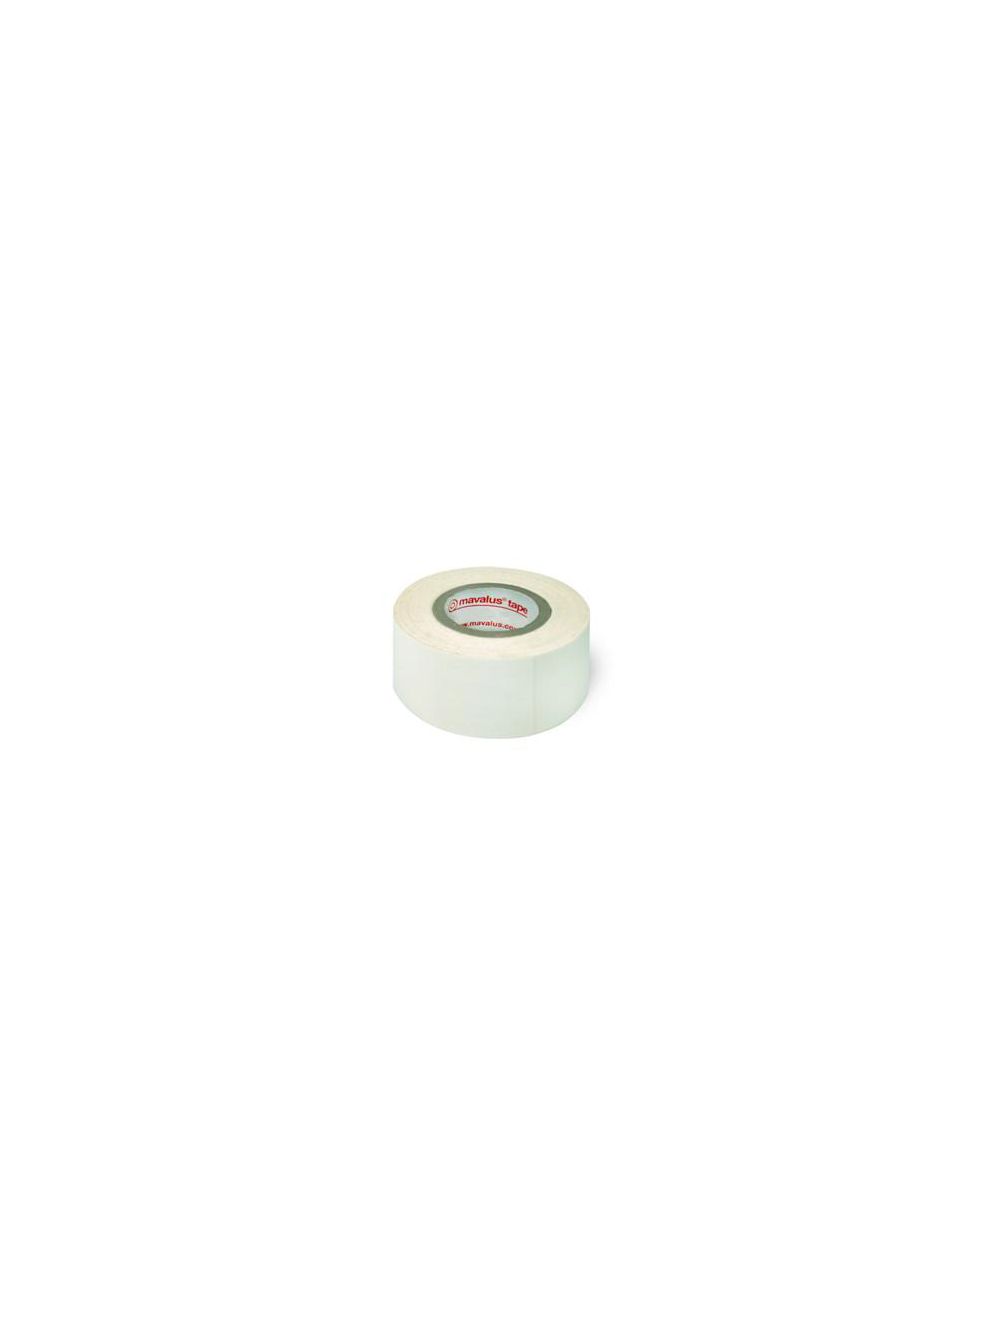 Mavalus White Removable Poster Tape - Set of 3 by Mavalus